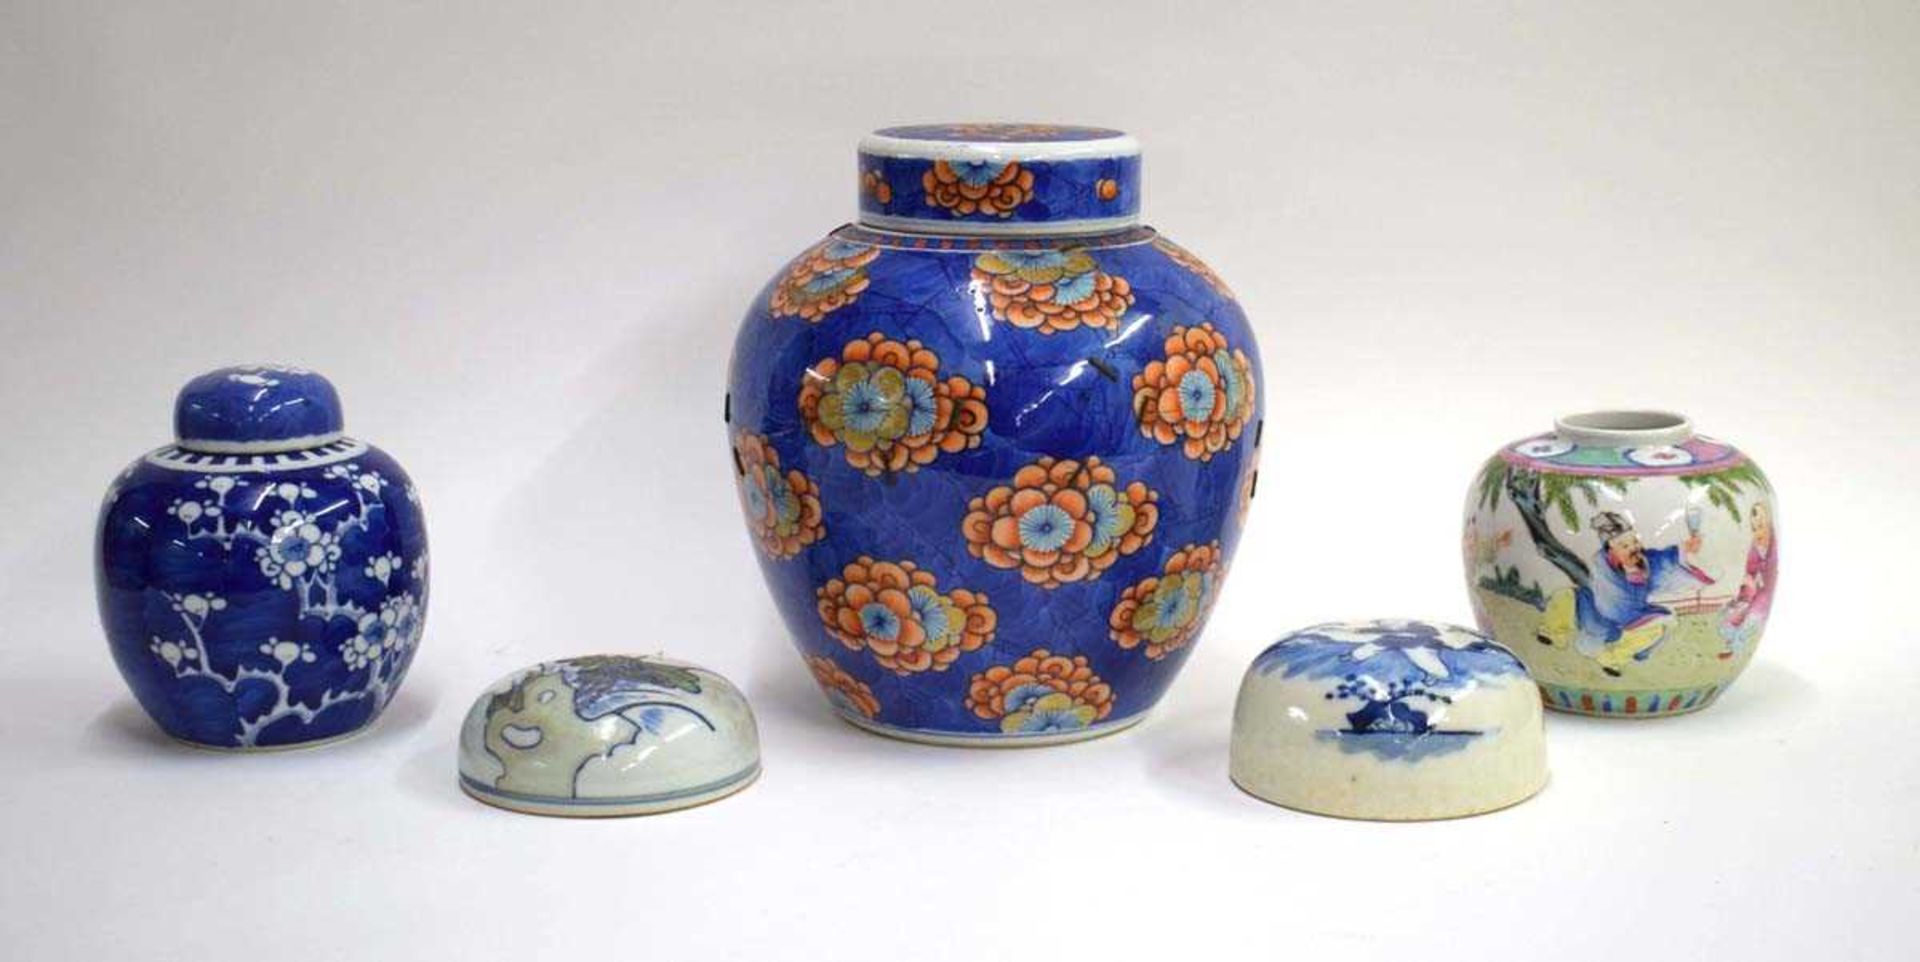 Thirteen Chinese ginger jars of typical form including a provincial example, h. 15 cm, blue and - Image 7 of 23